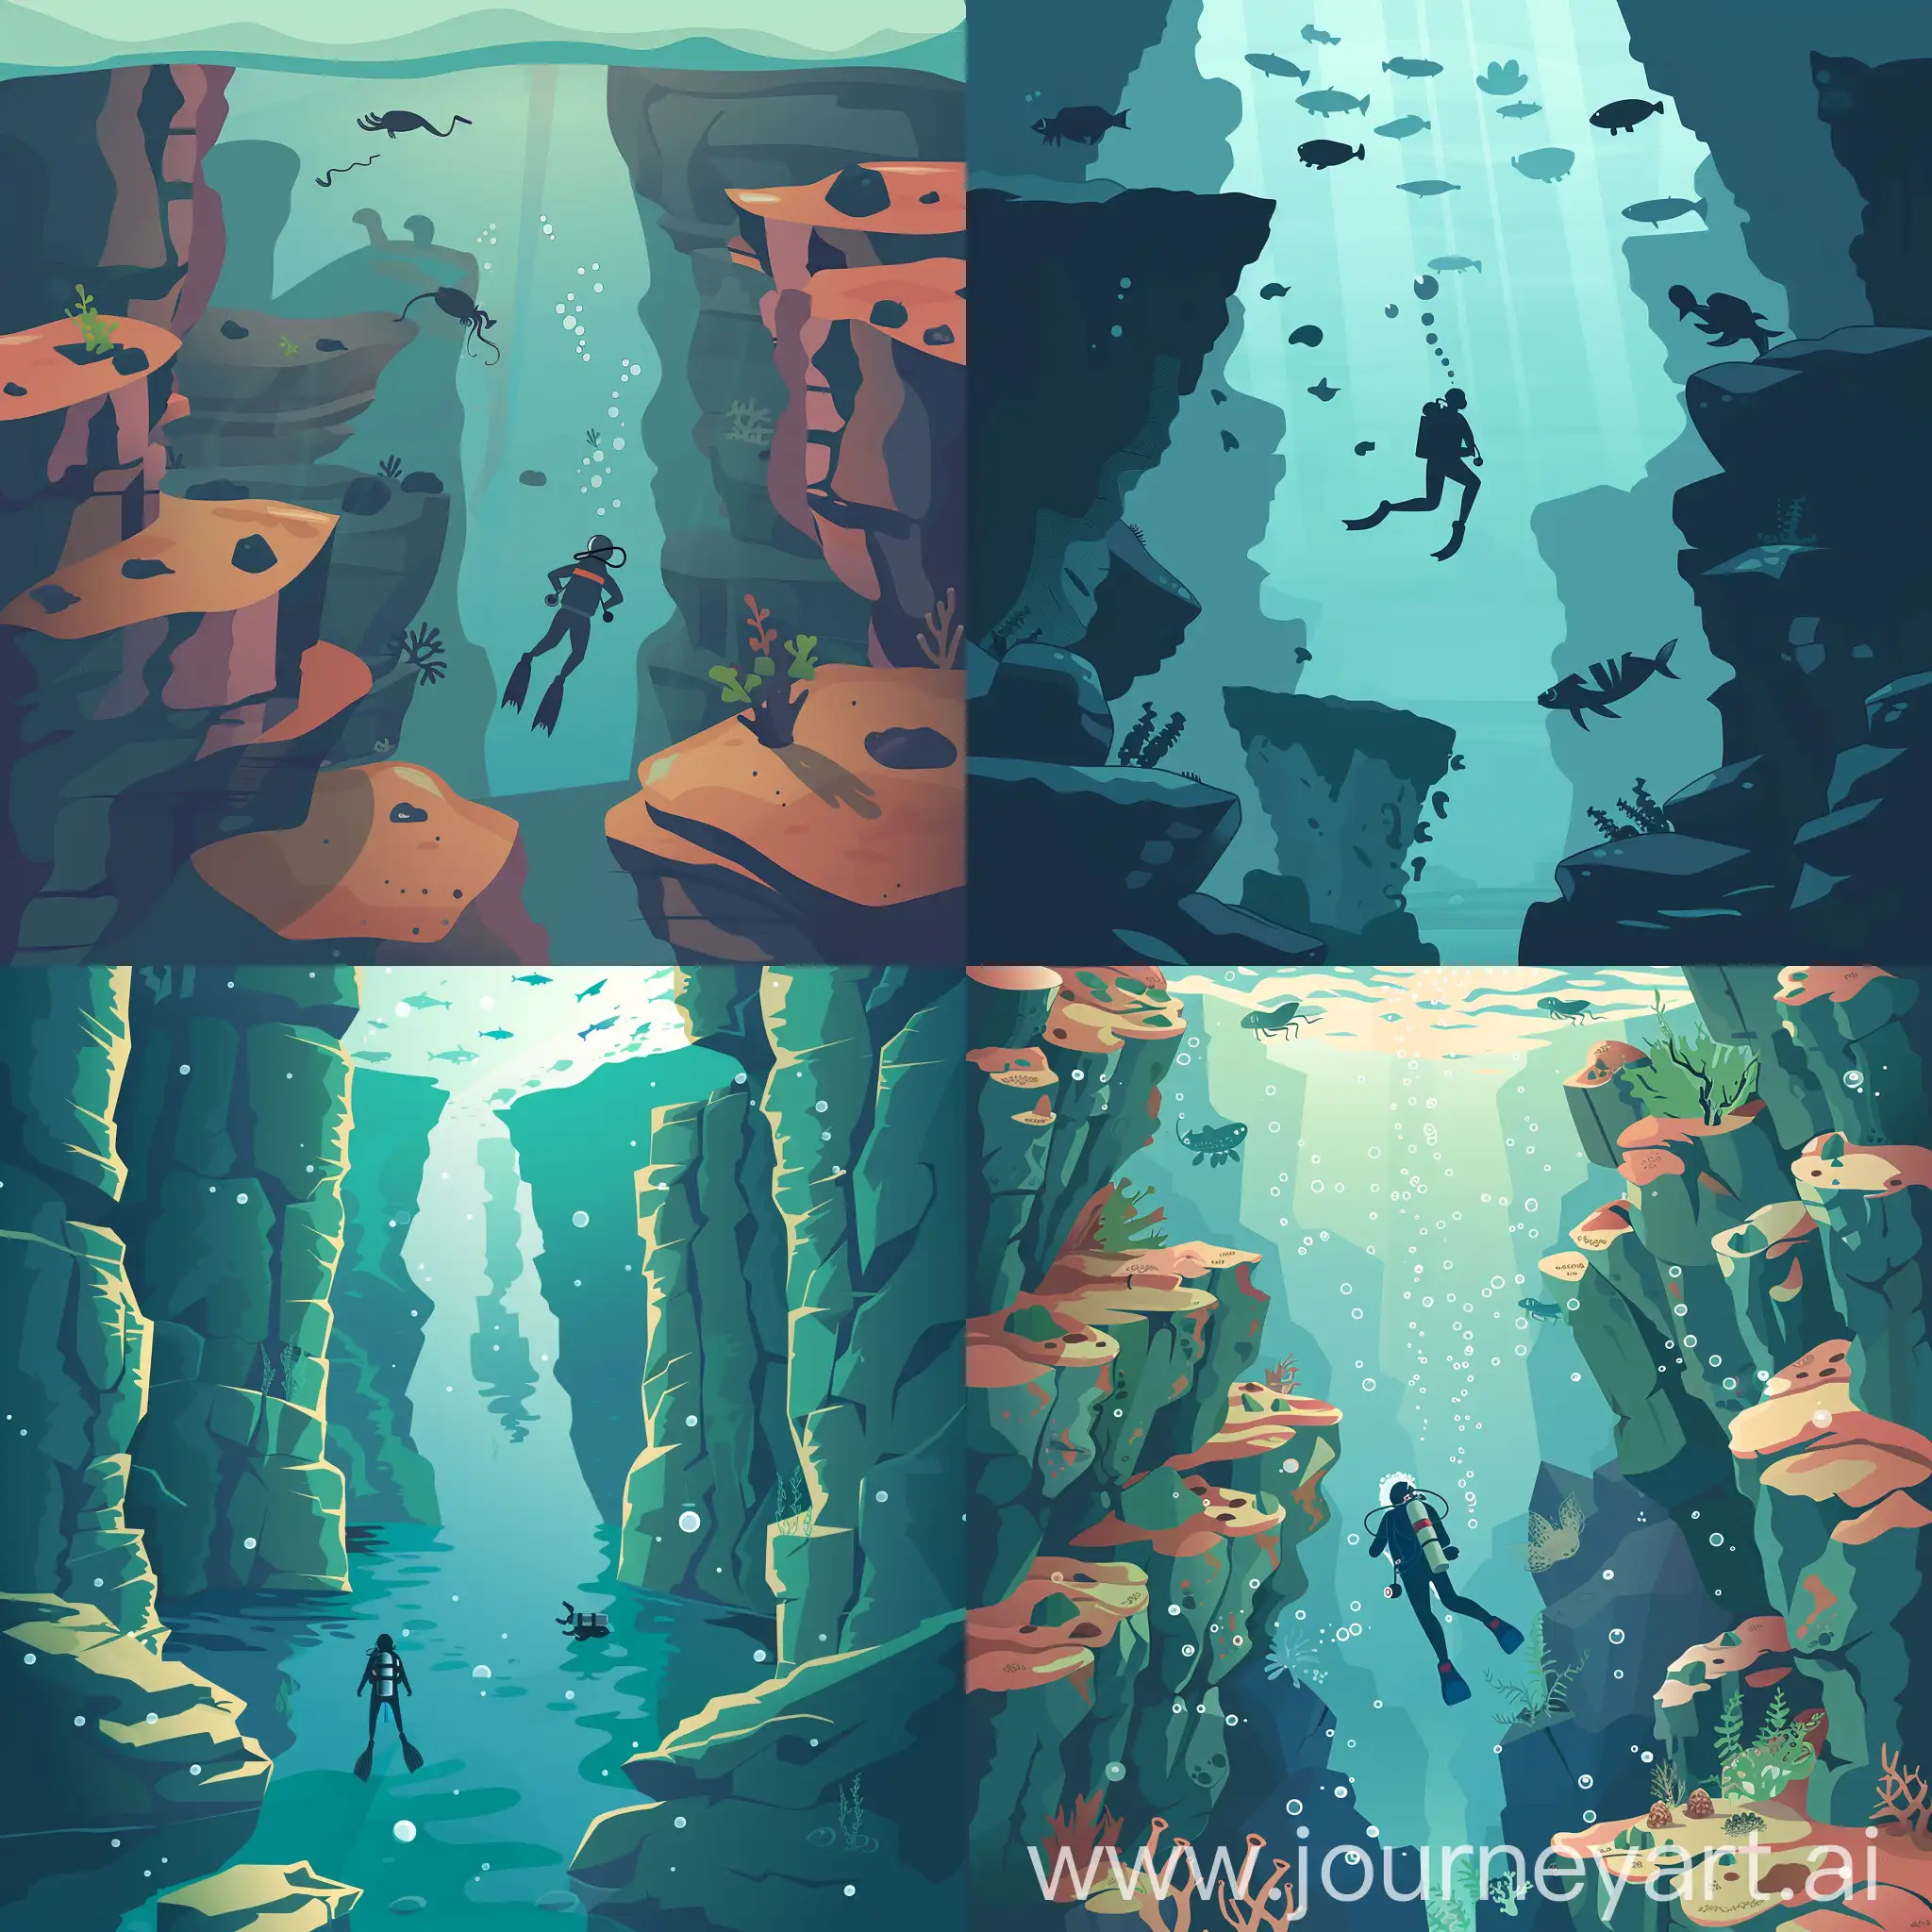 Exploring-Underwater-Depths-Diver-Amongst-Rocks-and-Cliffs-with-Aquatic-Creatures-in-Flat-Style